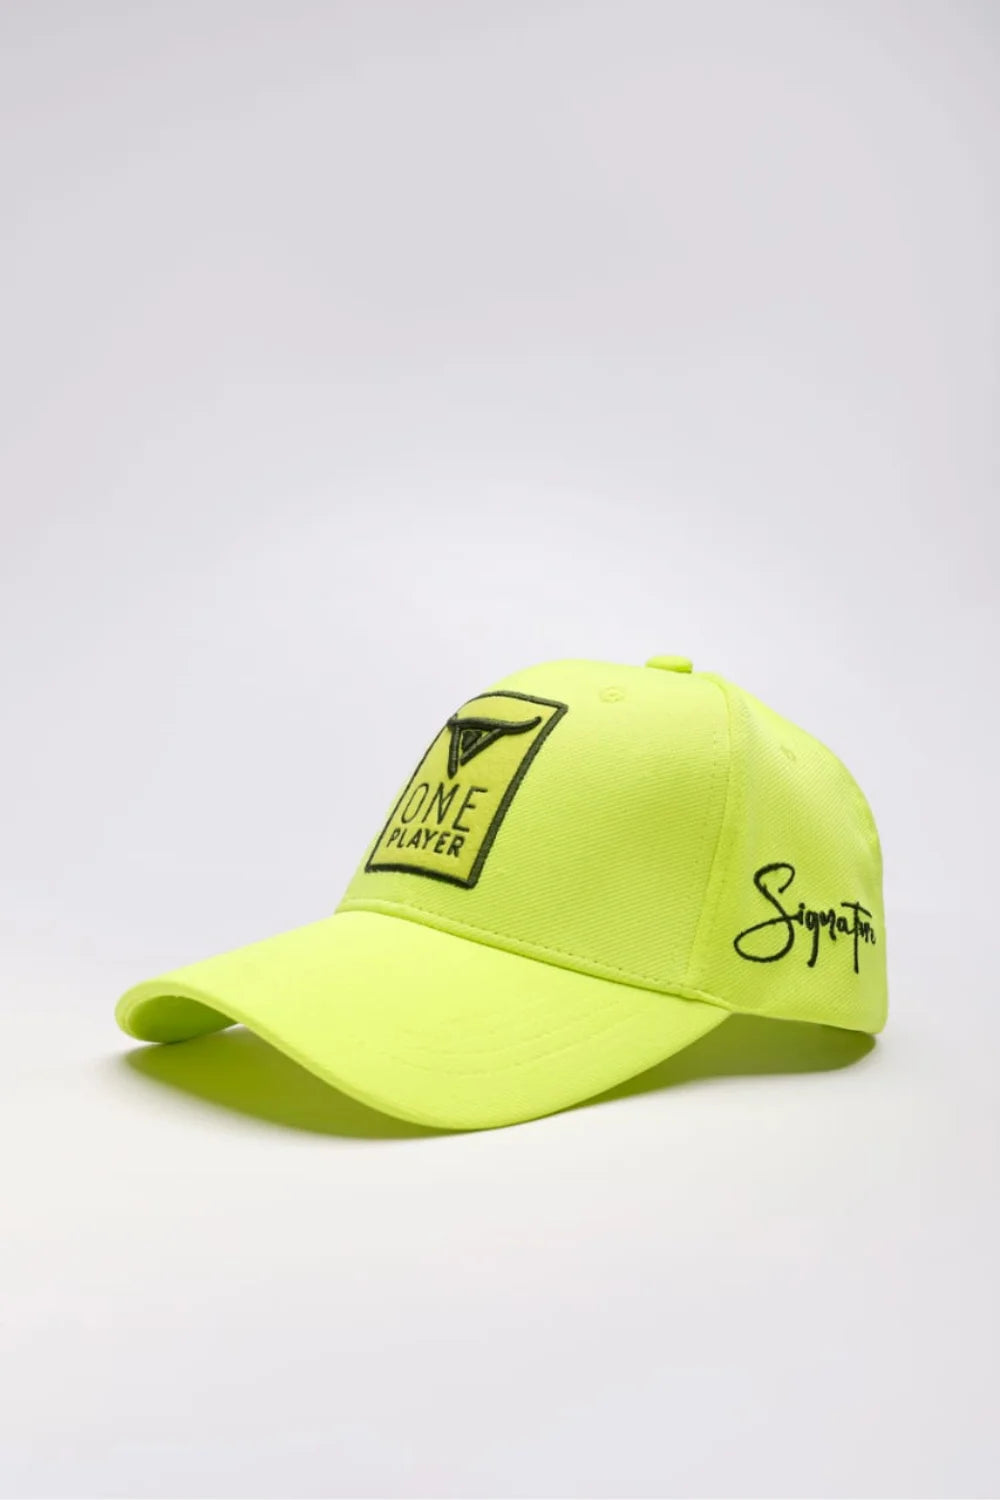 Unisex Yellow solid baseball cap, has a visor by One Player – oneplayer.co. in